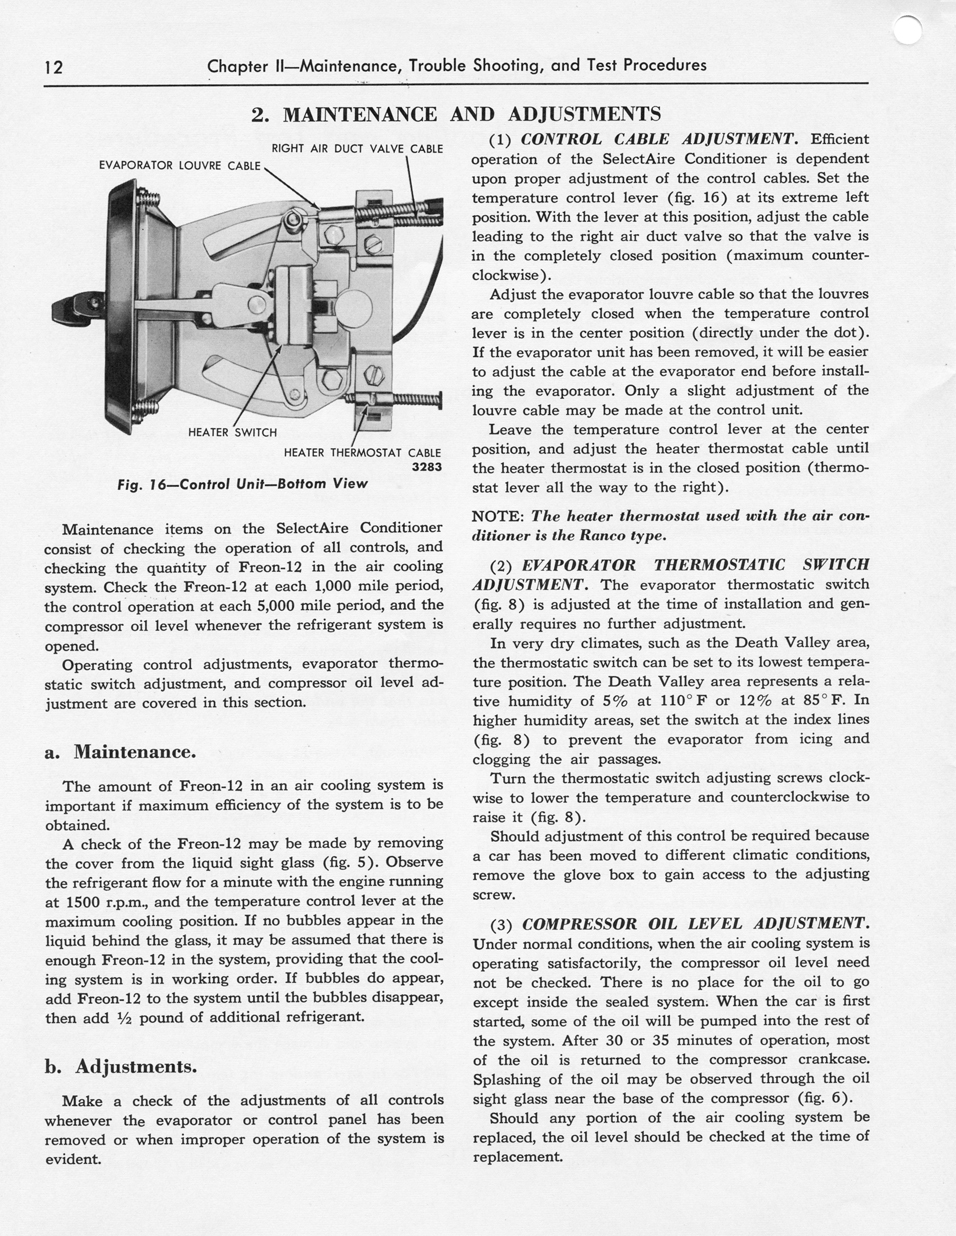 1955 Ford Car Air Conditioning Shop Manual Page 12 - "SelectAire Conditioner"